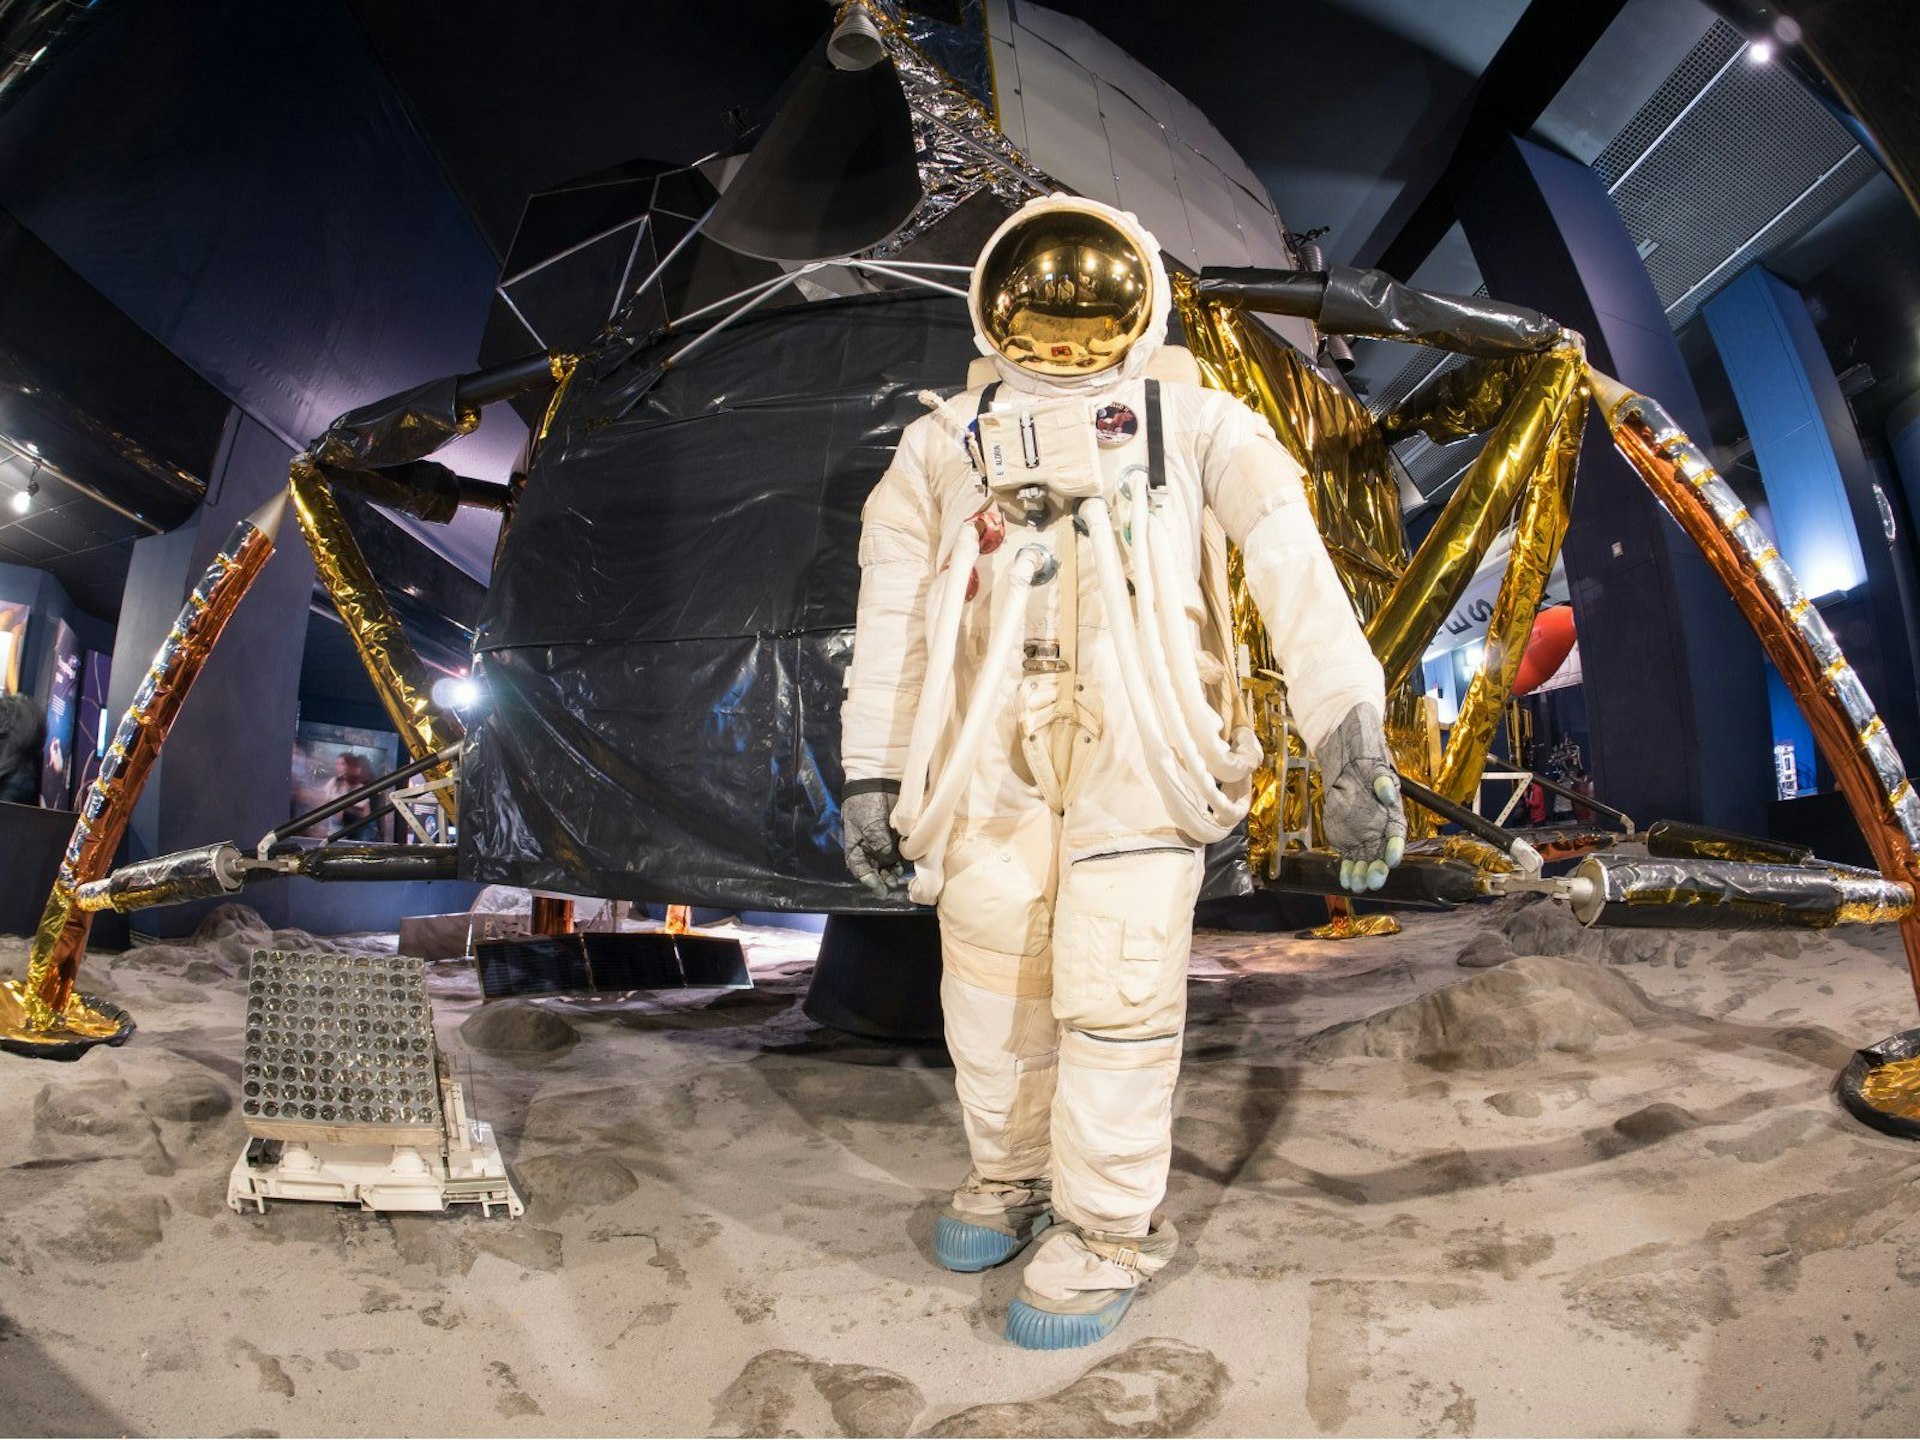 An astronaut stands near a module on the moon in an exhibit on space travel